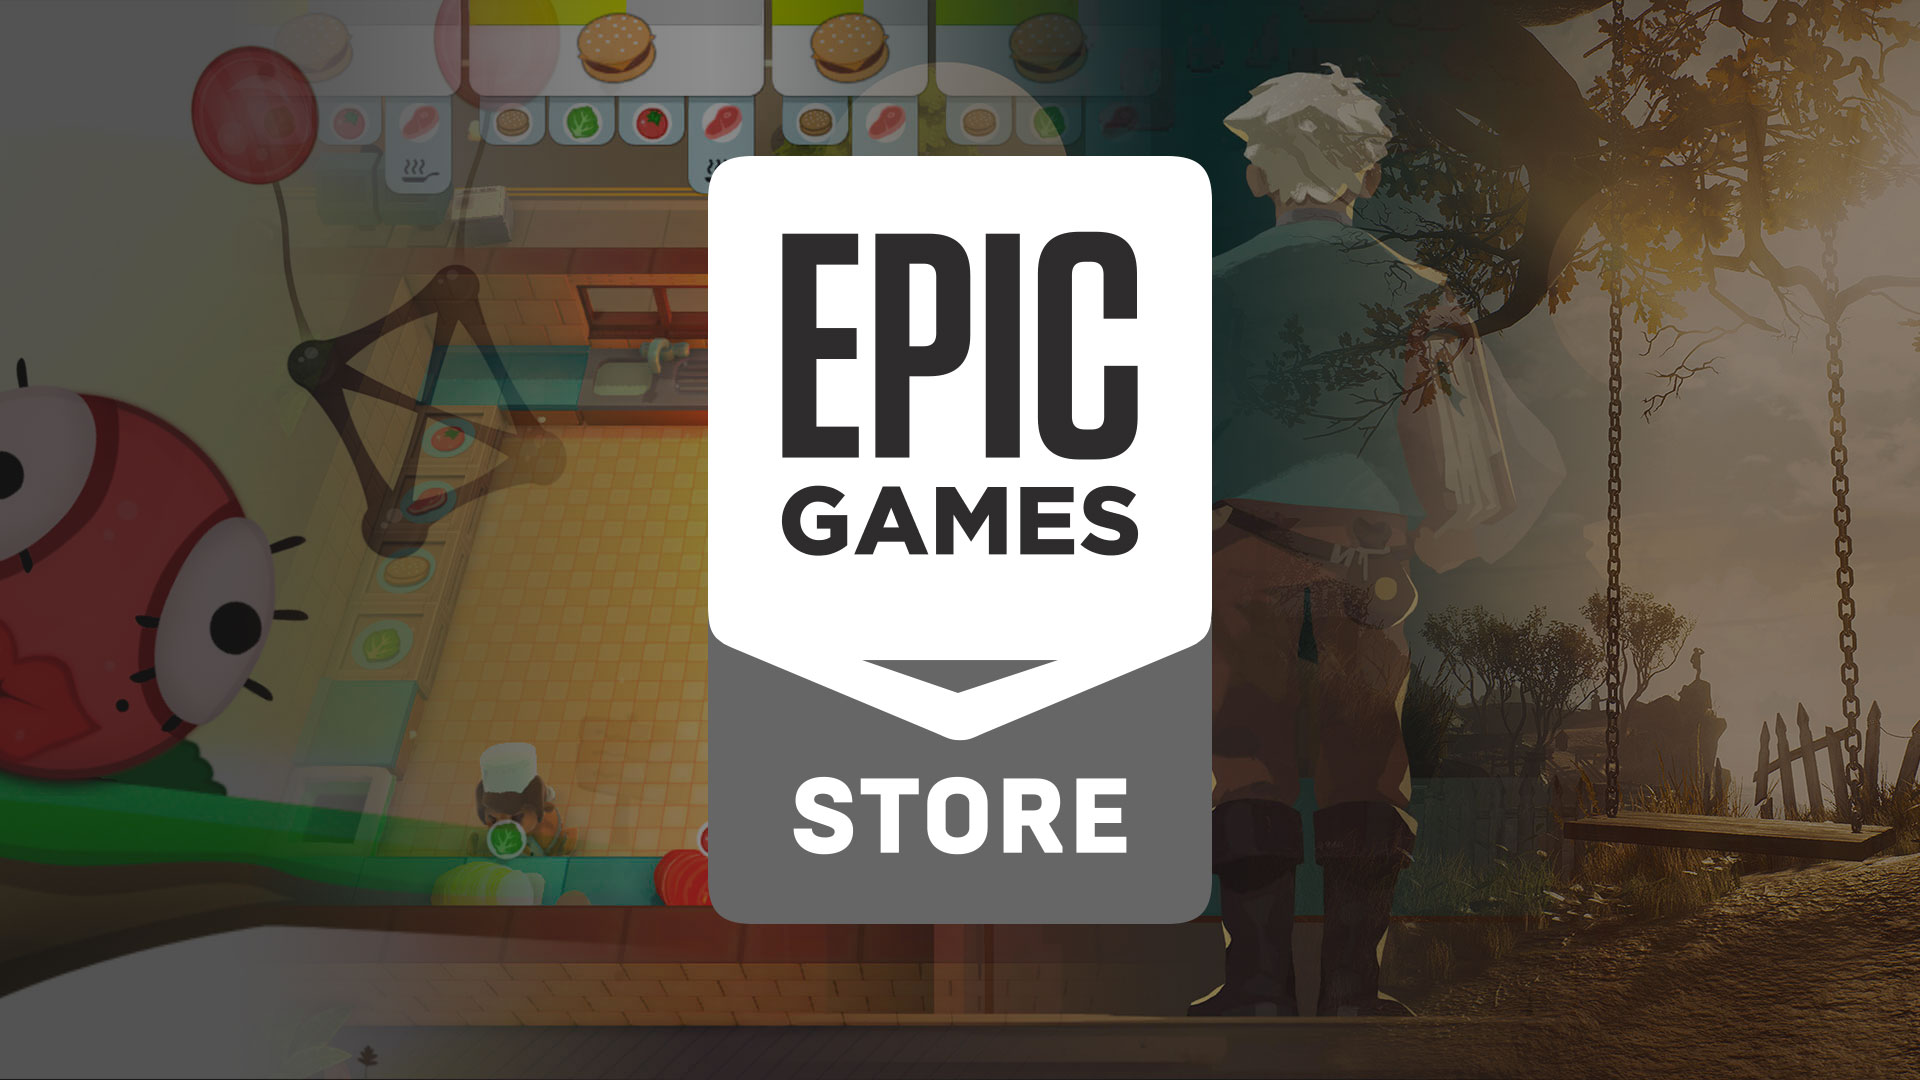 The Epic Games Store is giving away $80 worth of free games, be quick